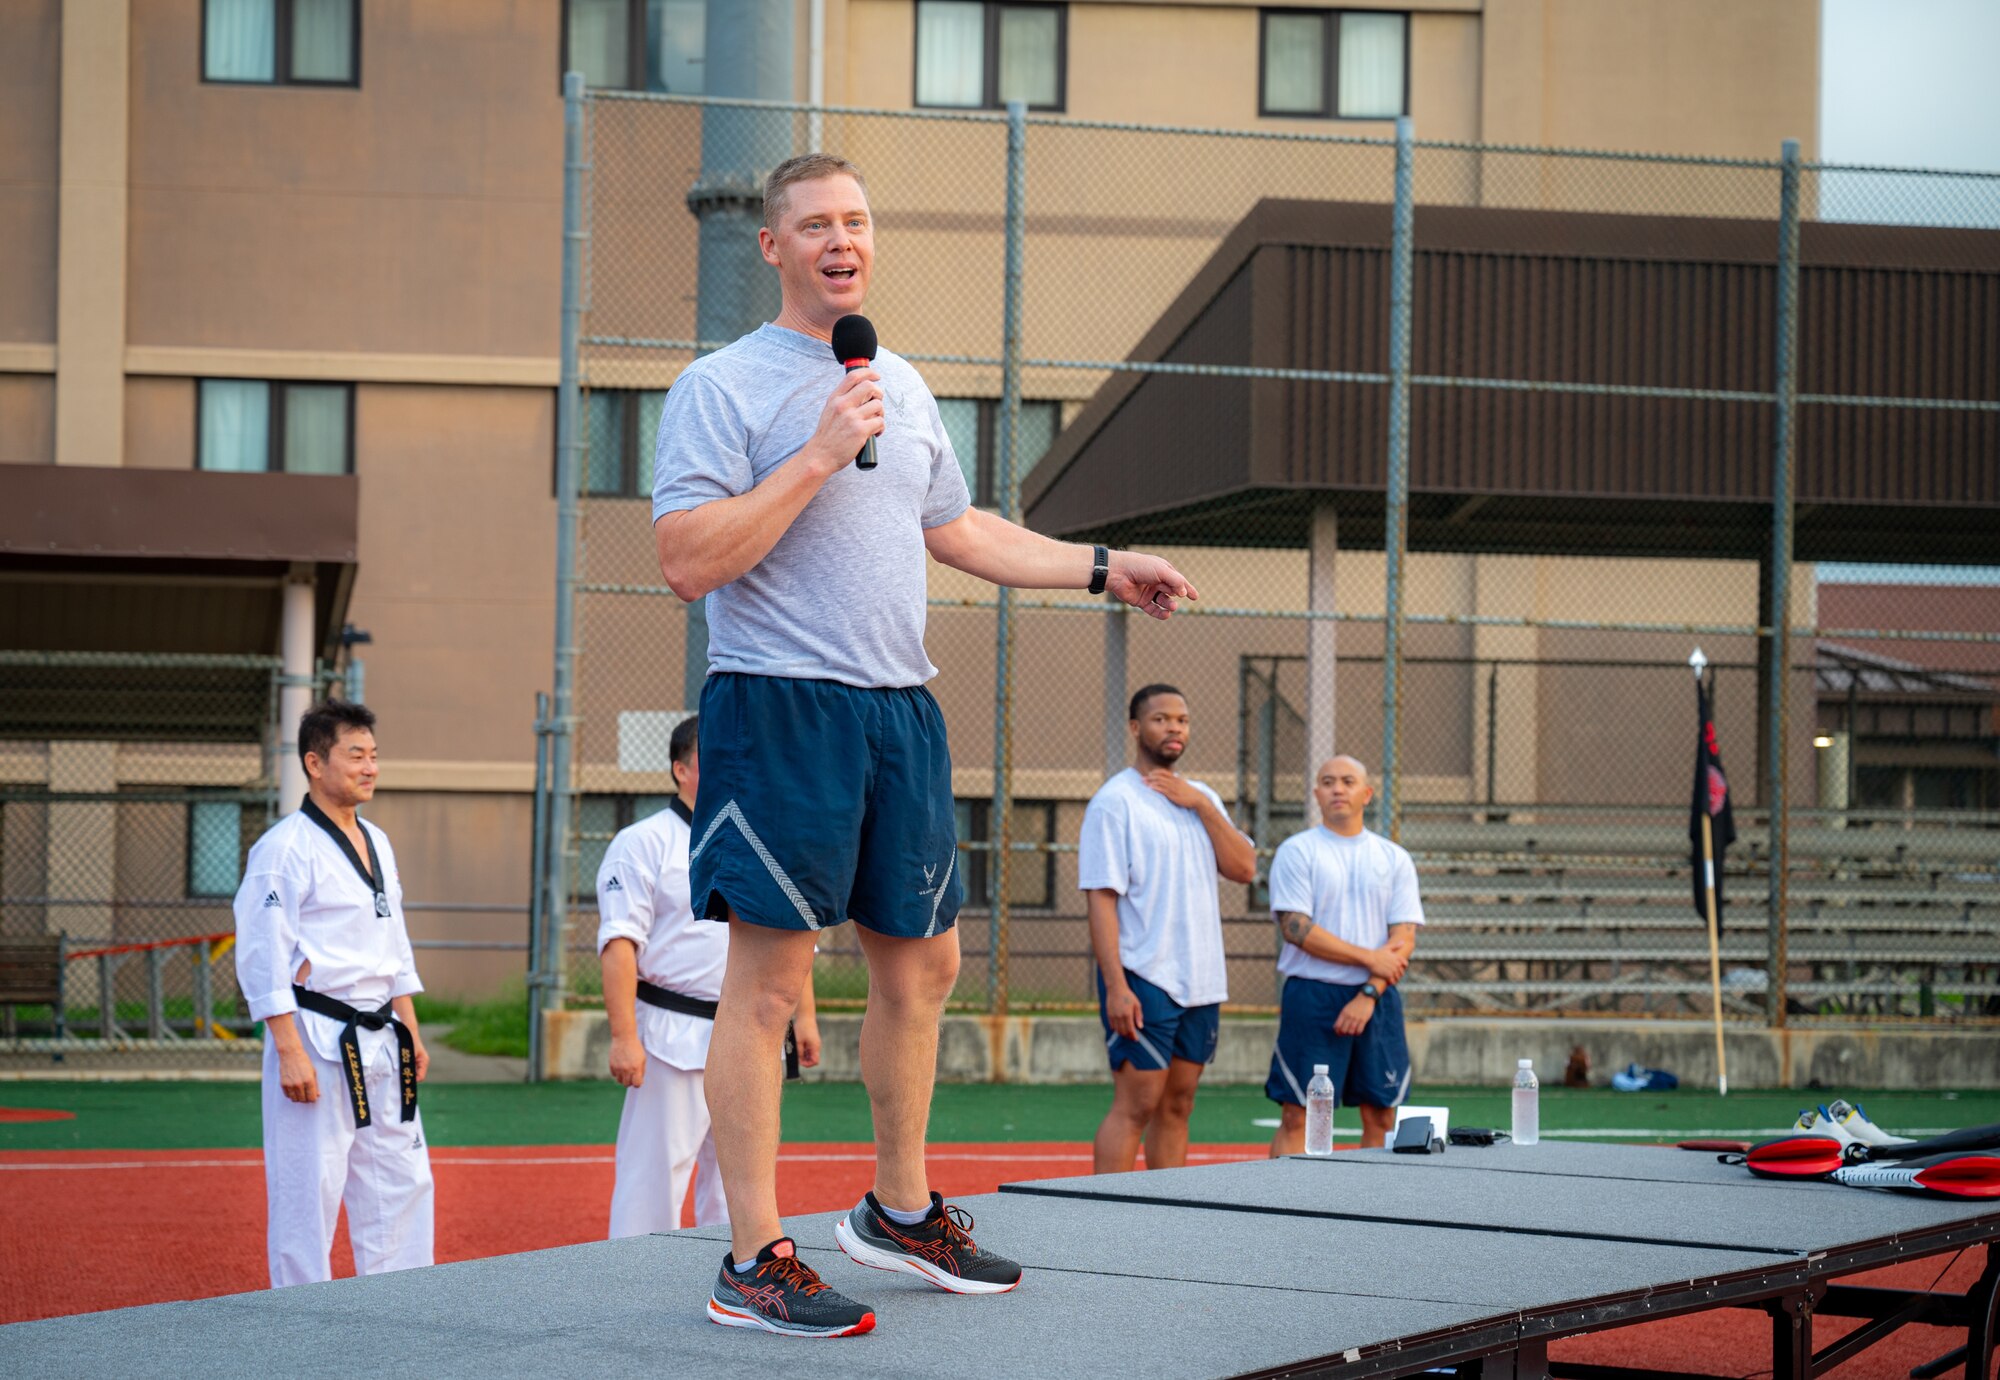 U.S. Air Force Col. Kyle Grygo, 51st Mission Support Group commander, offers words of empowerment to Airmen during a taekwondo training event at Osan Air Base, Republic of Korea, Aug. 25, 2023. Airmen remain agile and resilient when using innovative methods of physical fitness. (U.S. Air Force photo by Staff Sgt. Kelsea Caballero)